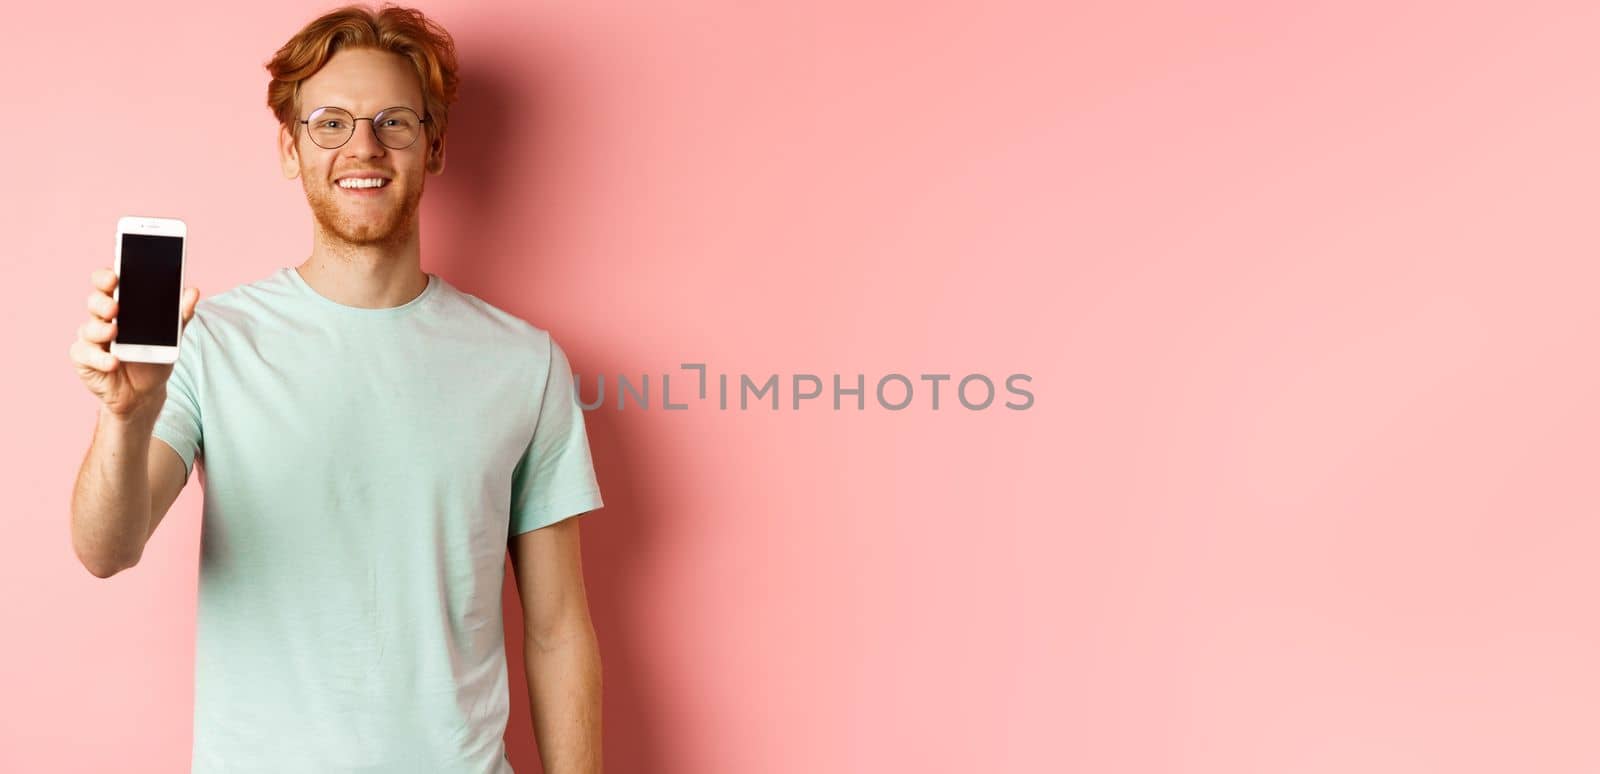 Handsome redhead man in glasses showing blank smartphone screen and smiling, demonstrate online promo or application, standing over pink background.